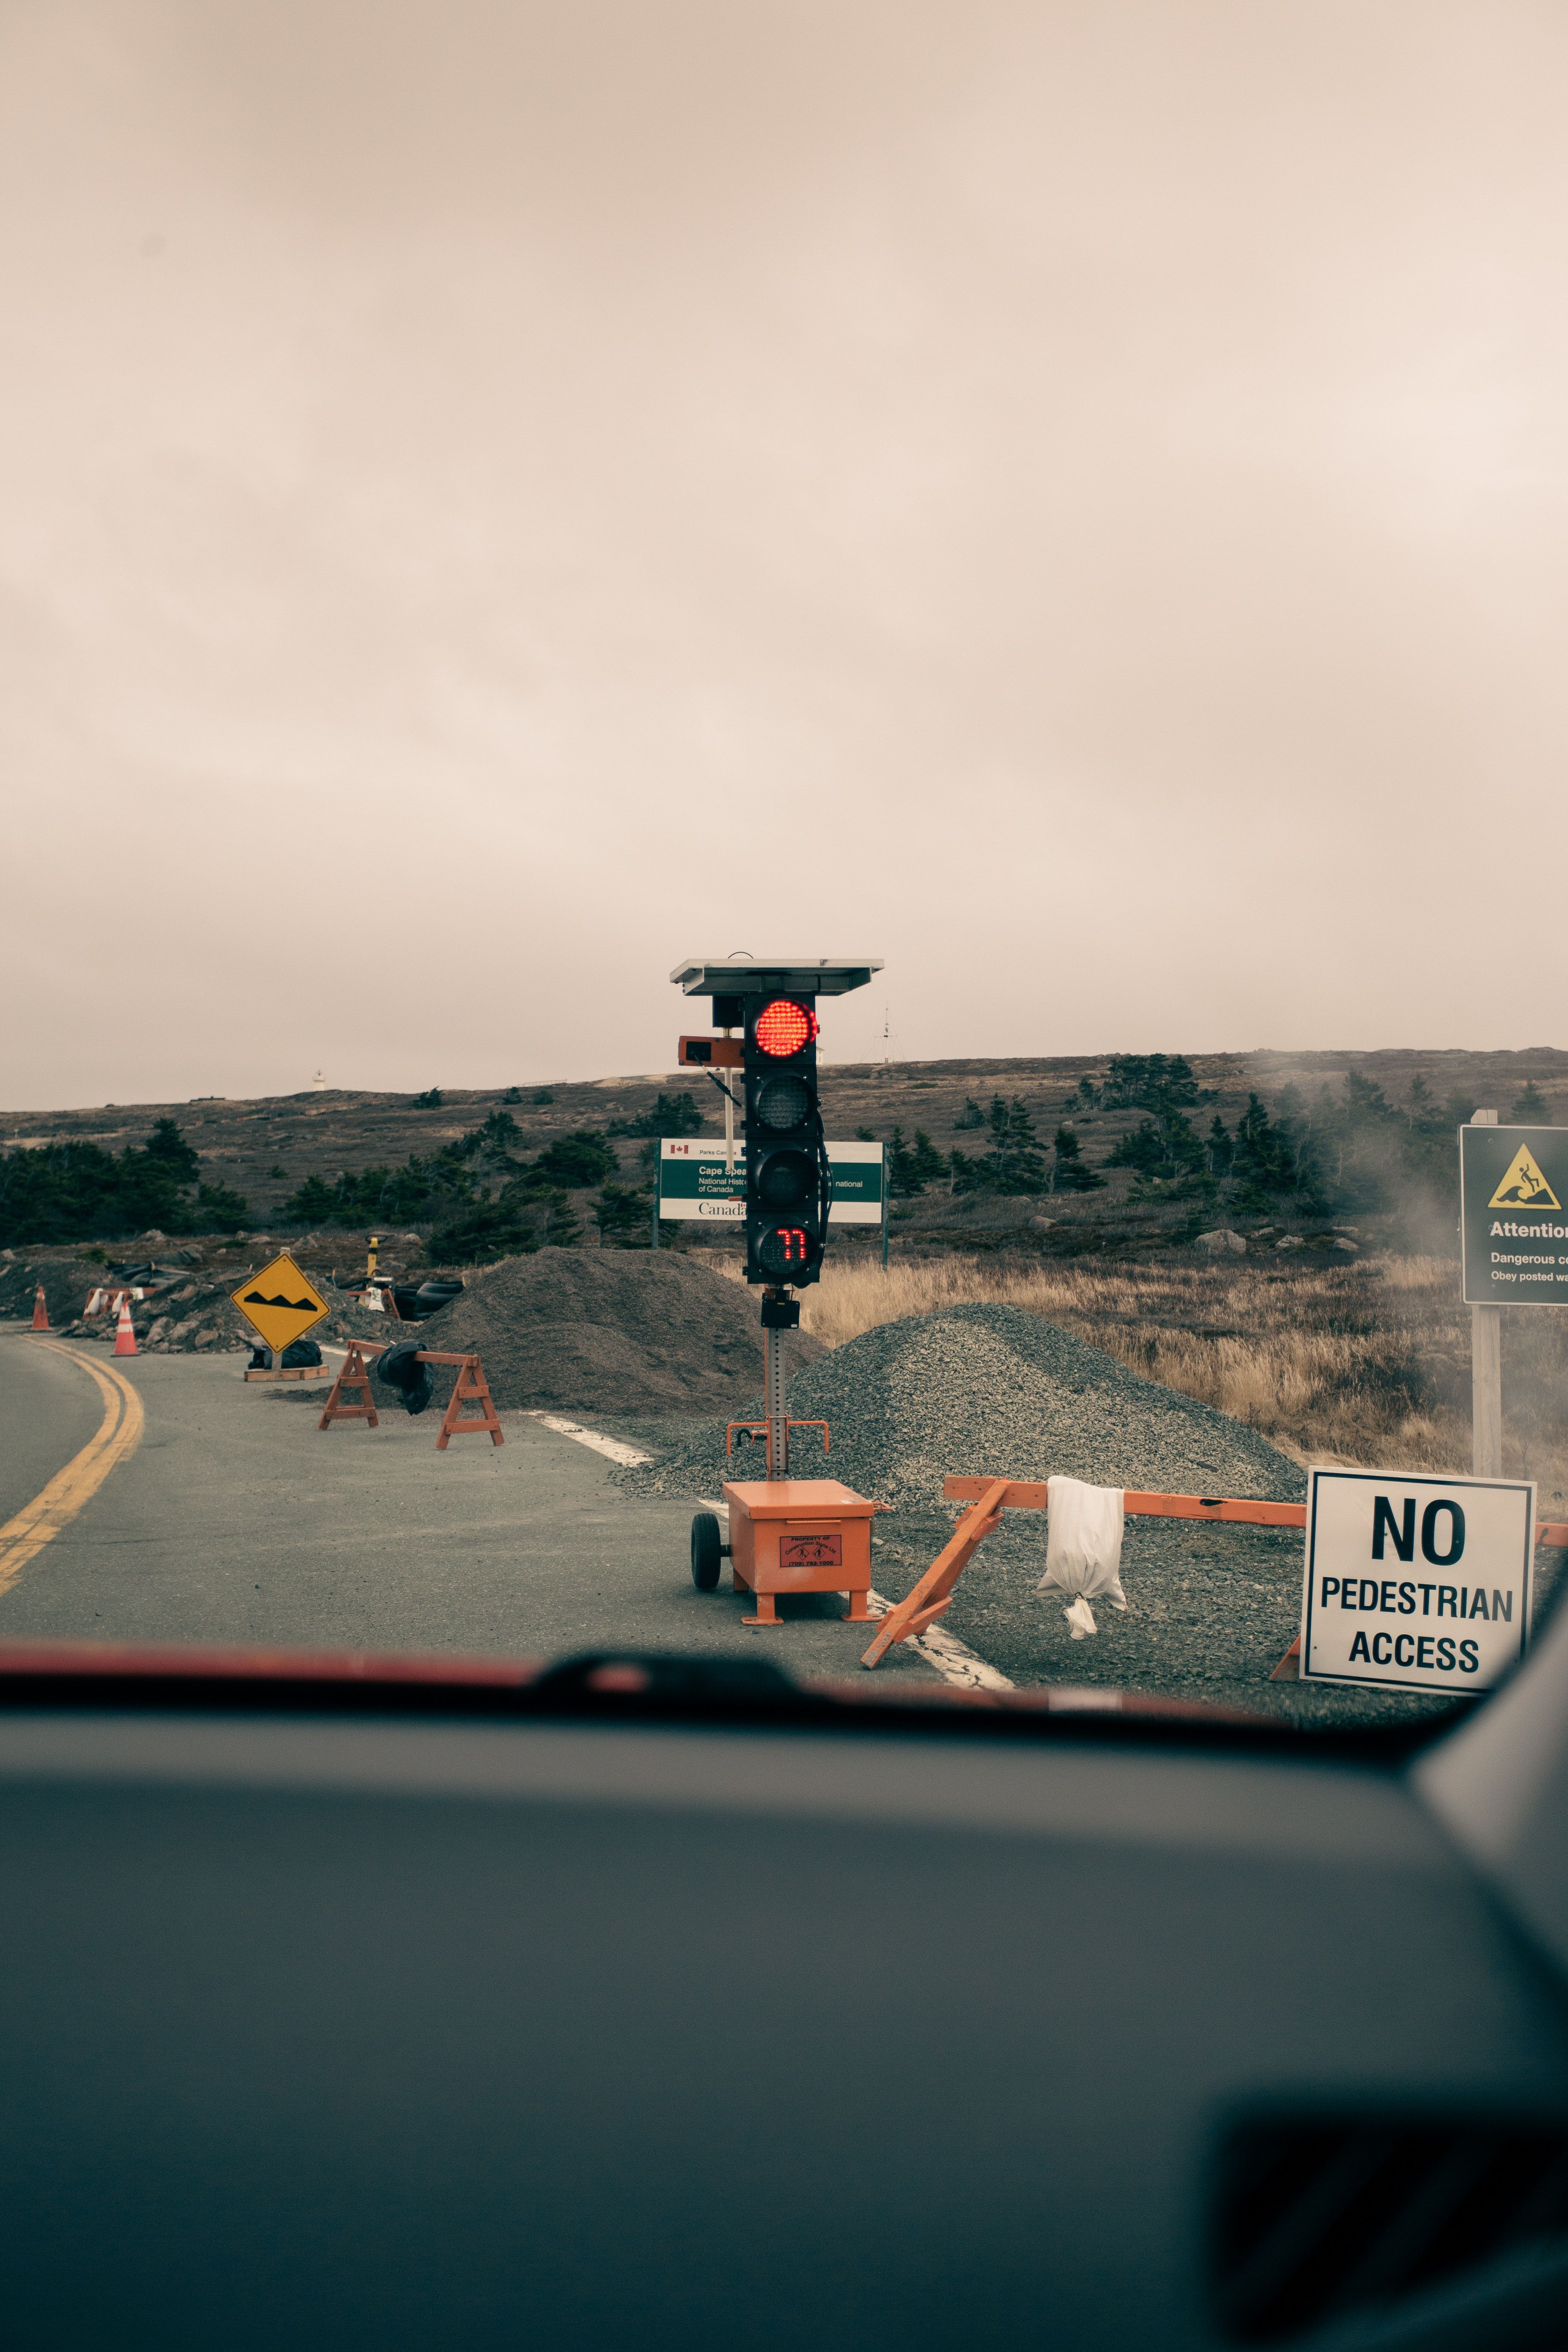 A Traffic Light on a Road with an Ongoing Construction · Free